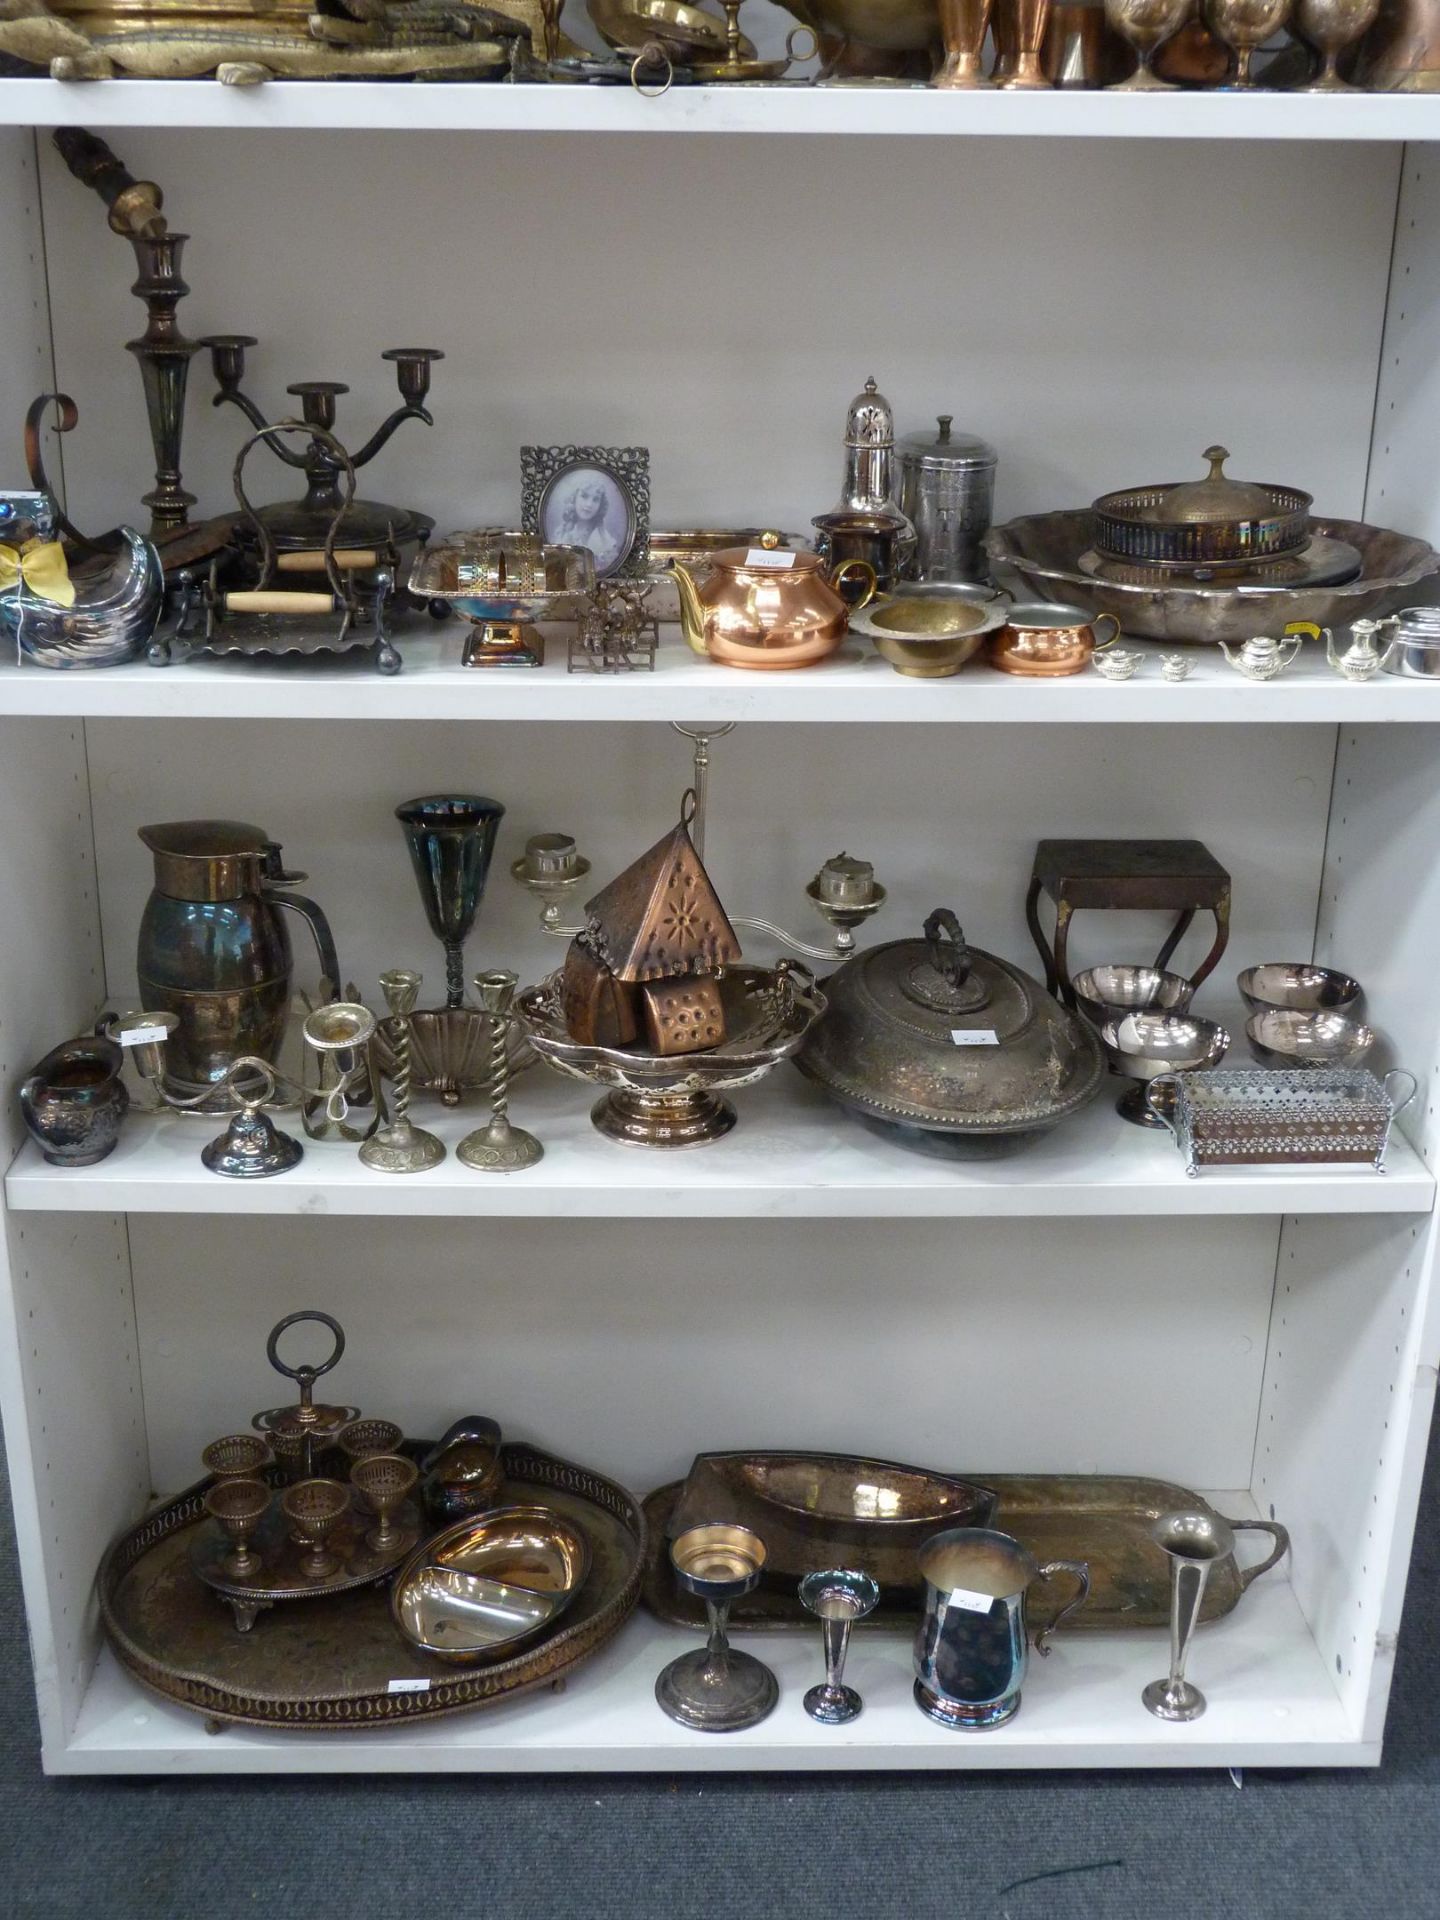 Three shelves to contain a selection of Stainless Steel, Silver Plated items to include Candlesticks